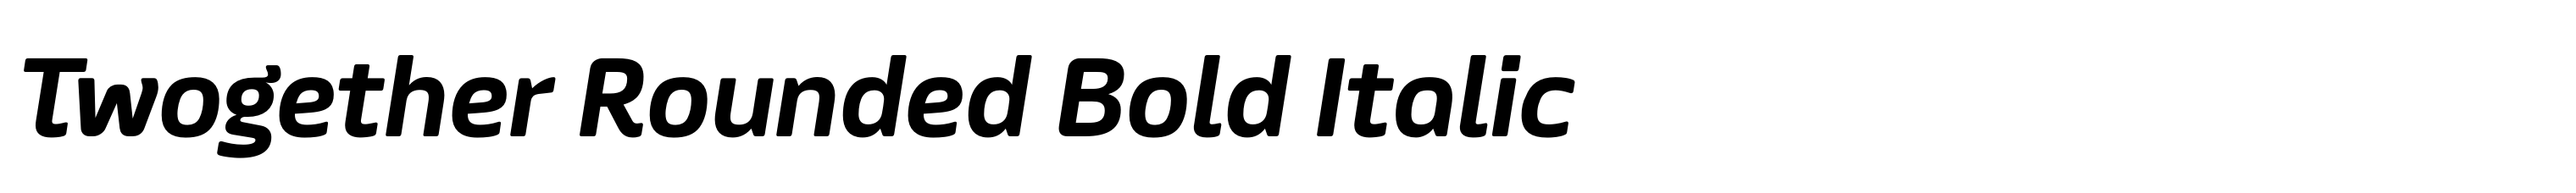 Twogether Rounded Bold Italic